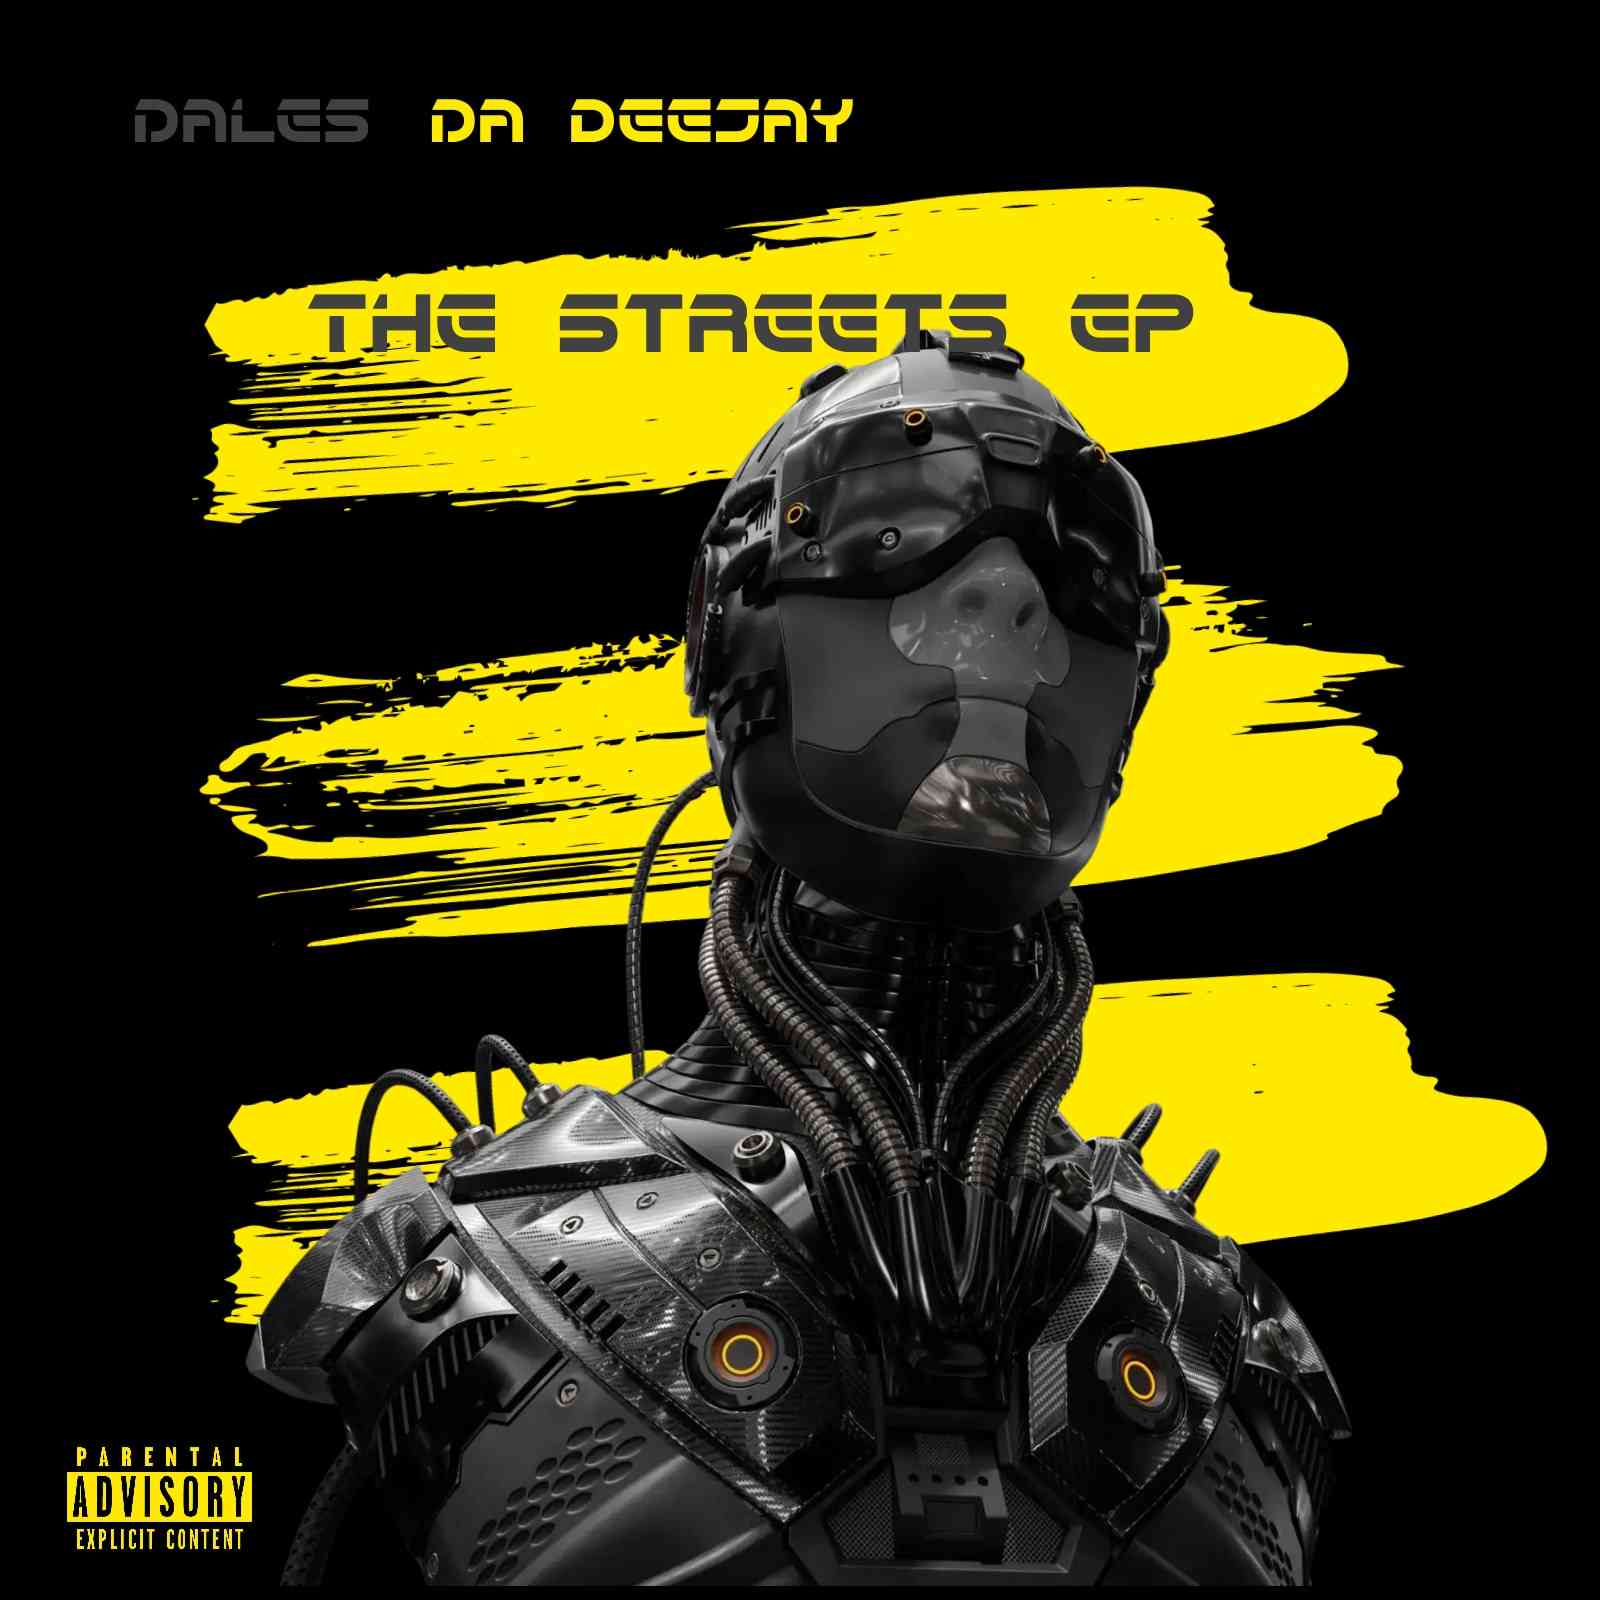 DaLes Da Deejay - The Streets EP